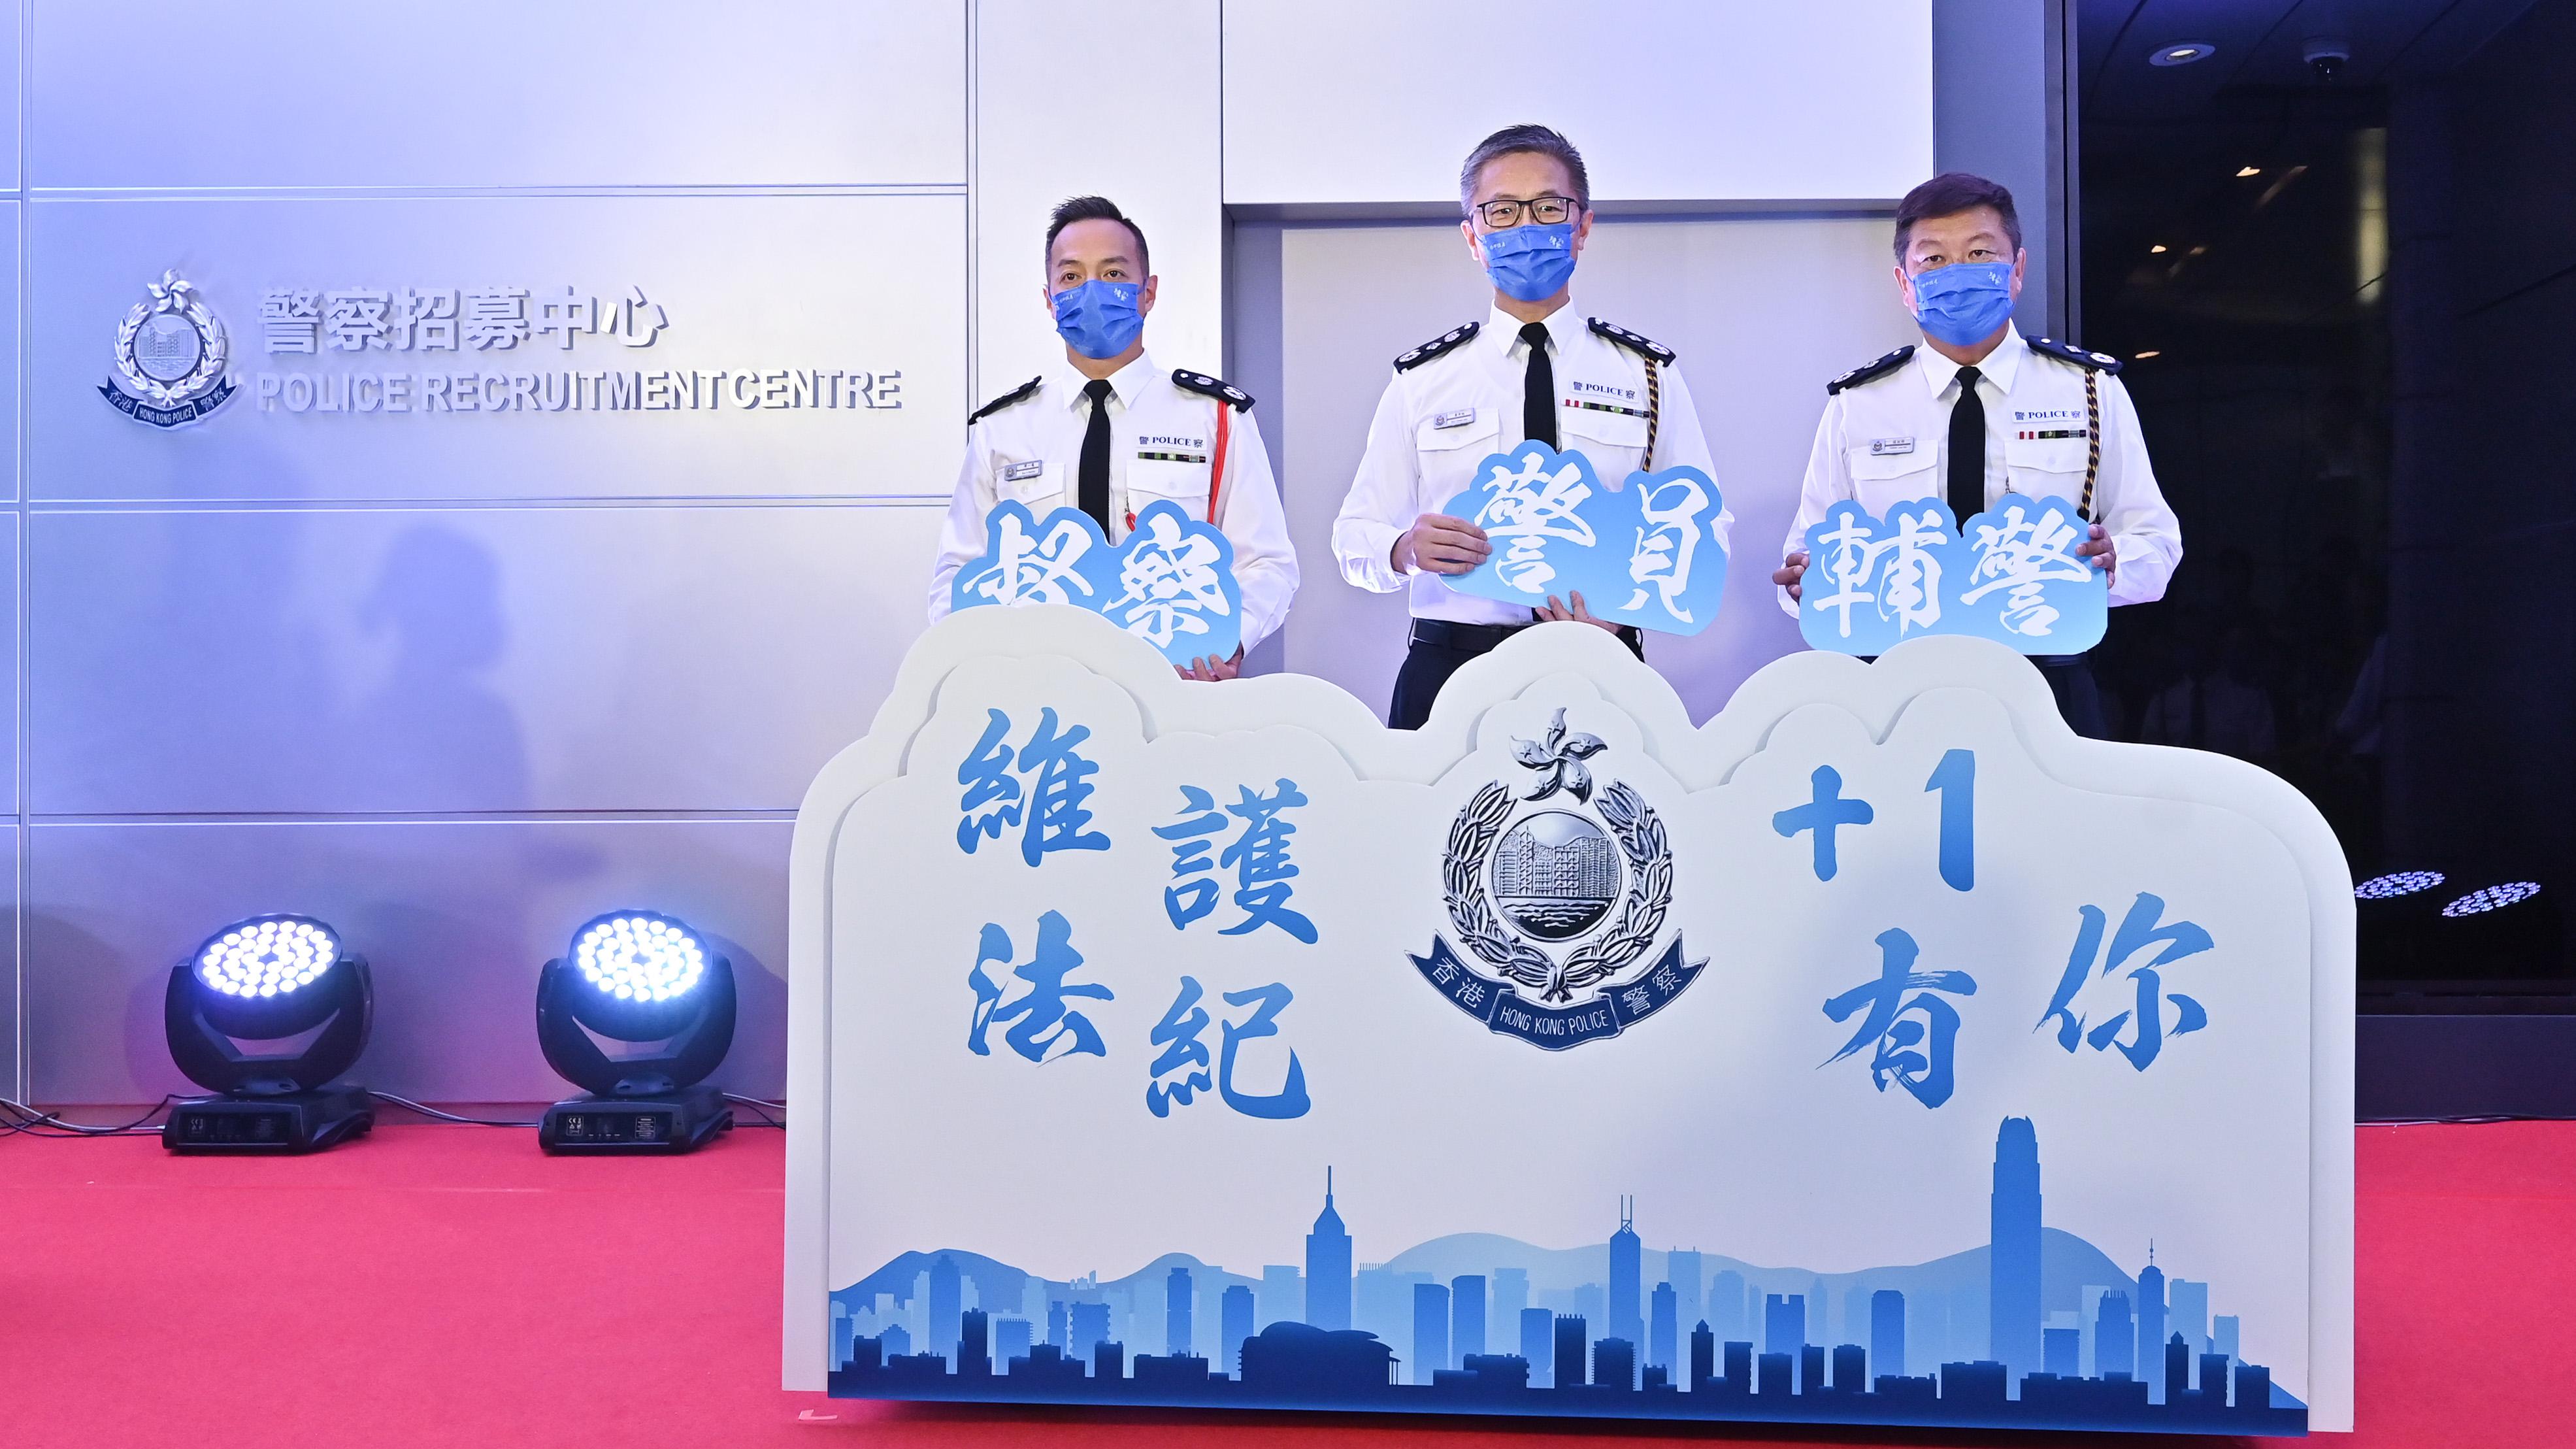 The Commissioner of Police, Mr Siu Chak-yee (centre); the Deputy Commissioner of Police (Management), Mr Chow Yat-ming (left); and the Commandant of the Hong Kong Auxiliary Police Force, Mr Yang Joe-tsi (right) officiate at the opening ceremony for the Police Recruitment Centre today (October 27).